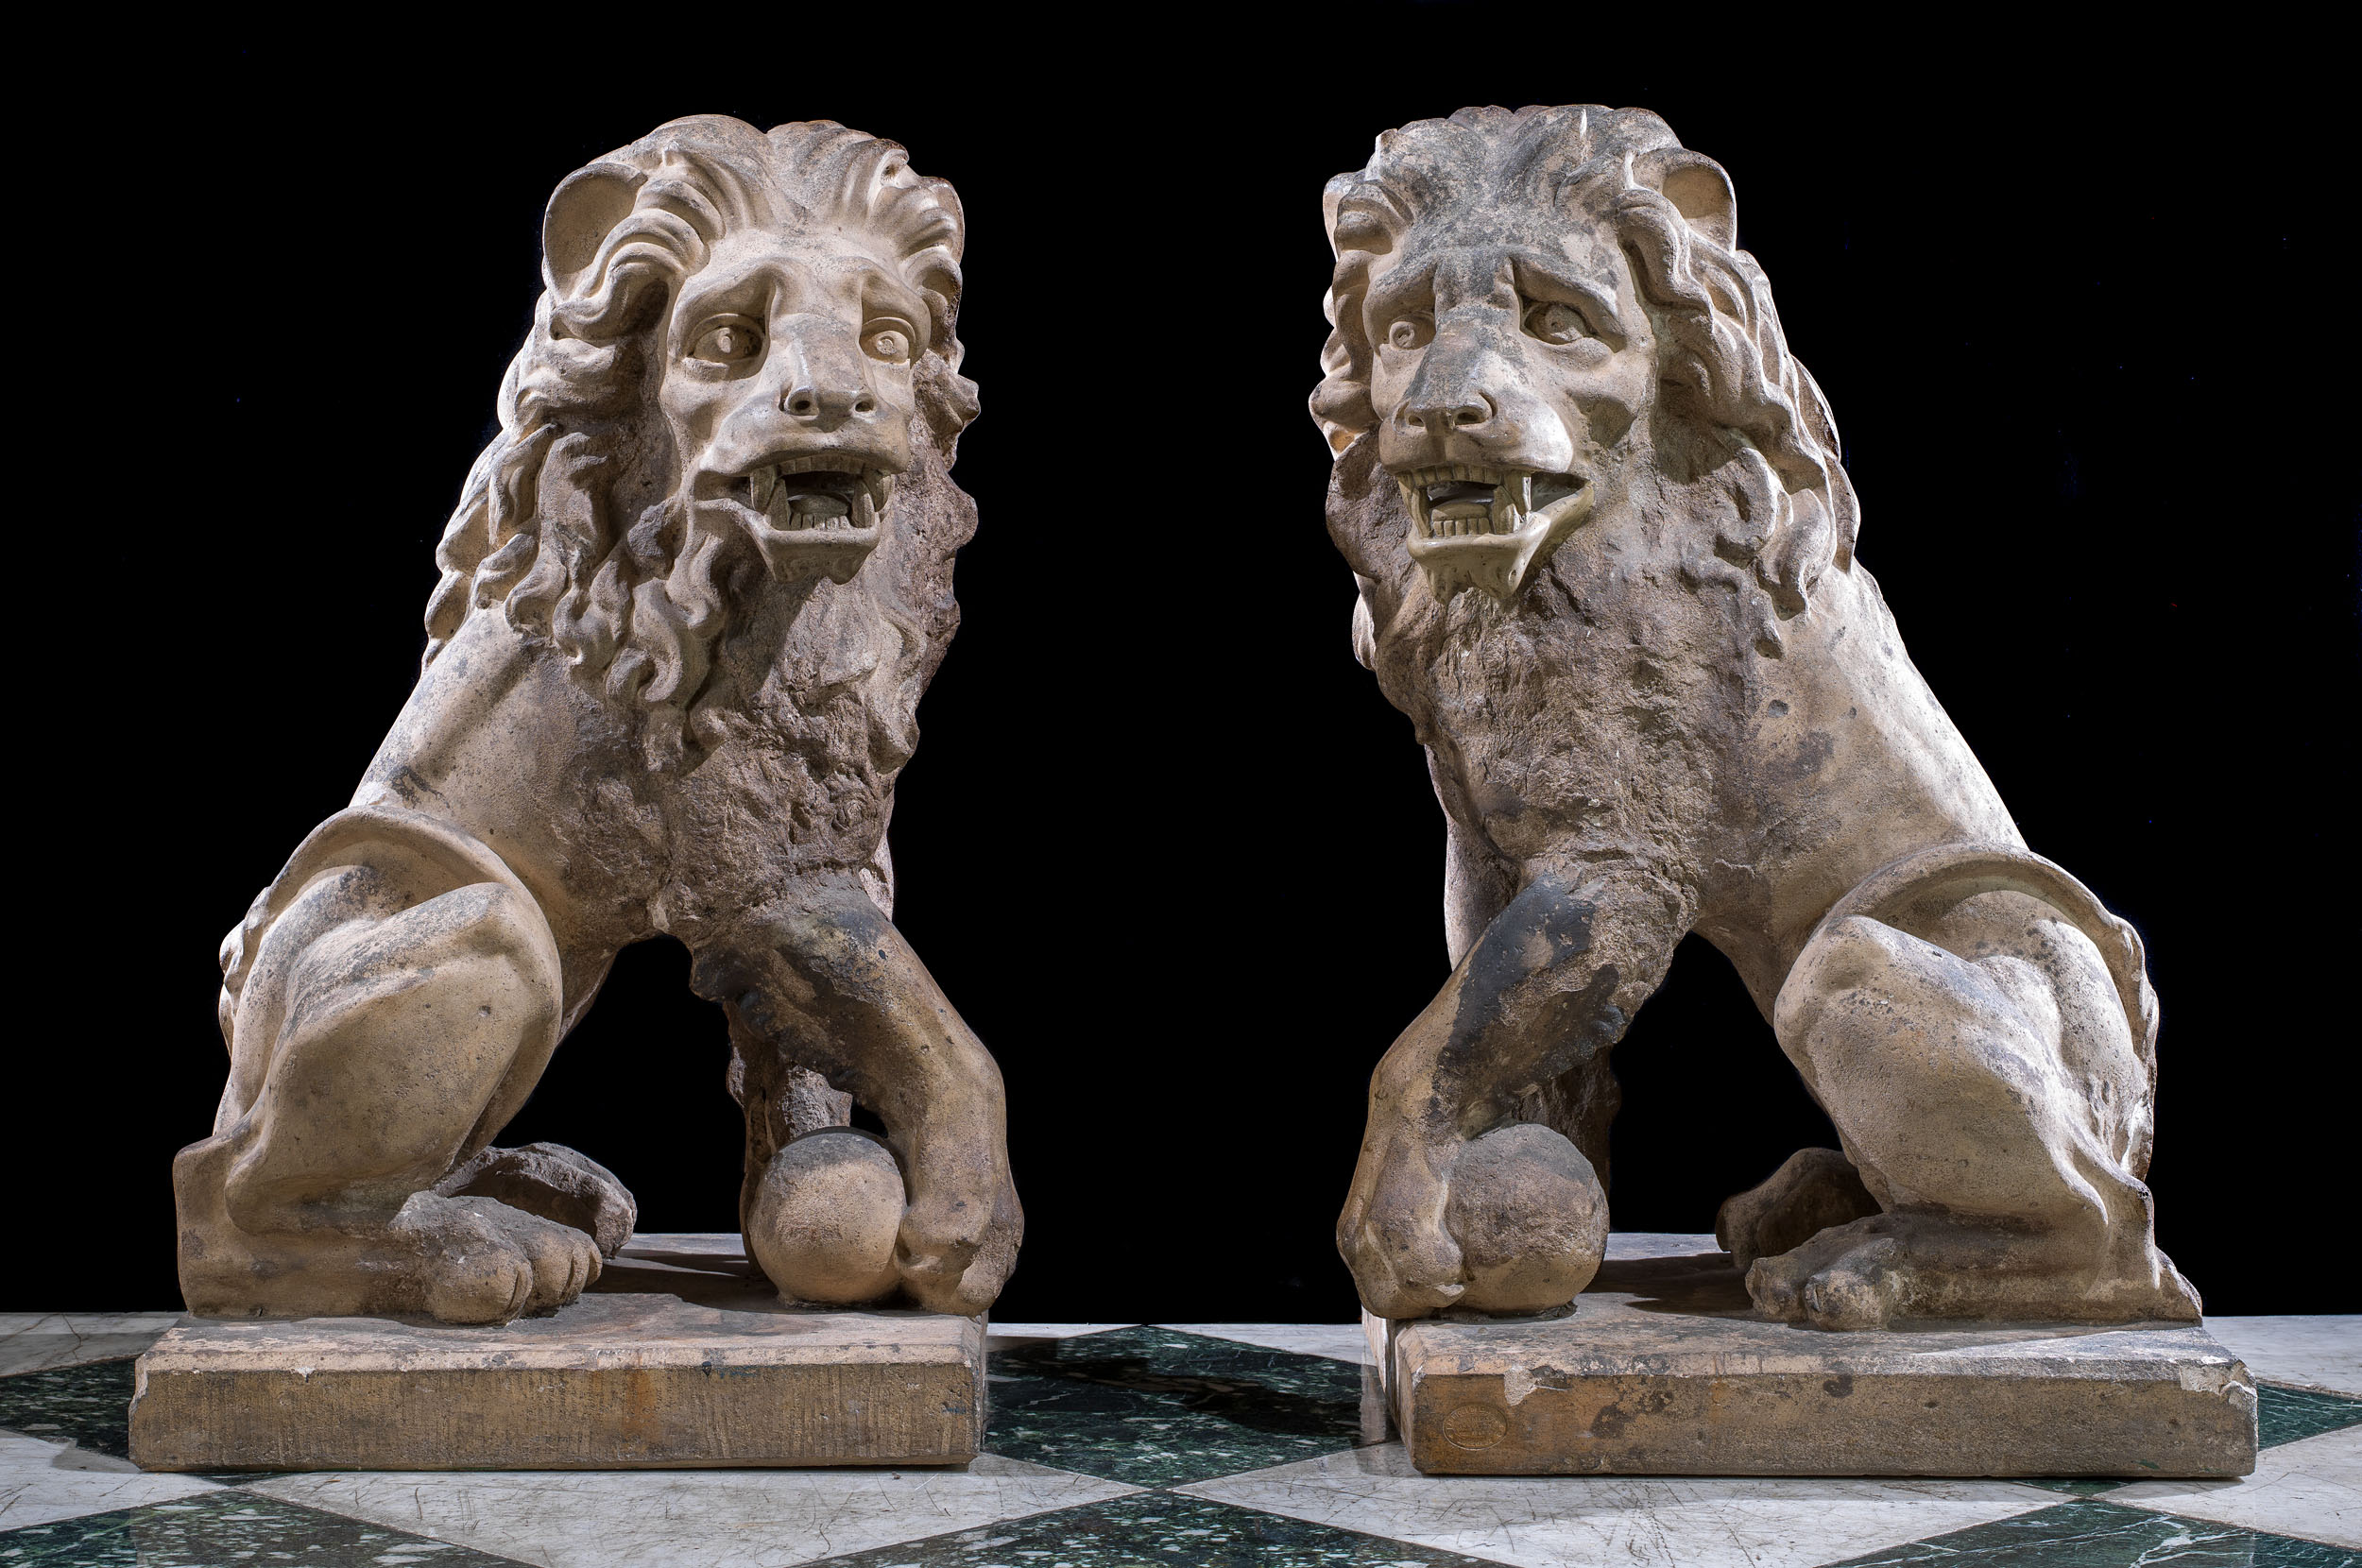  A pair of antique Baroque style terracotta lions
